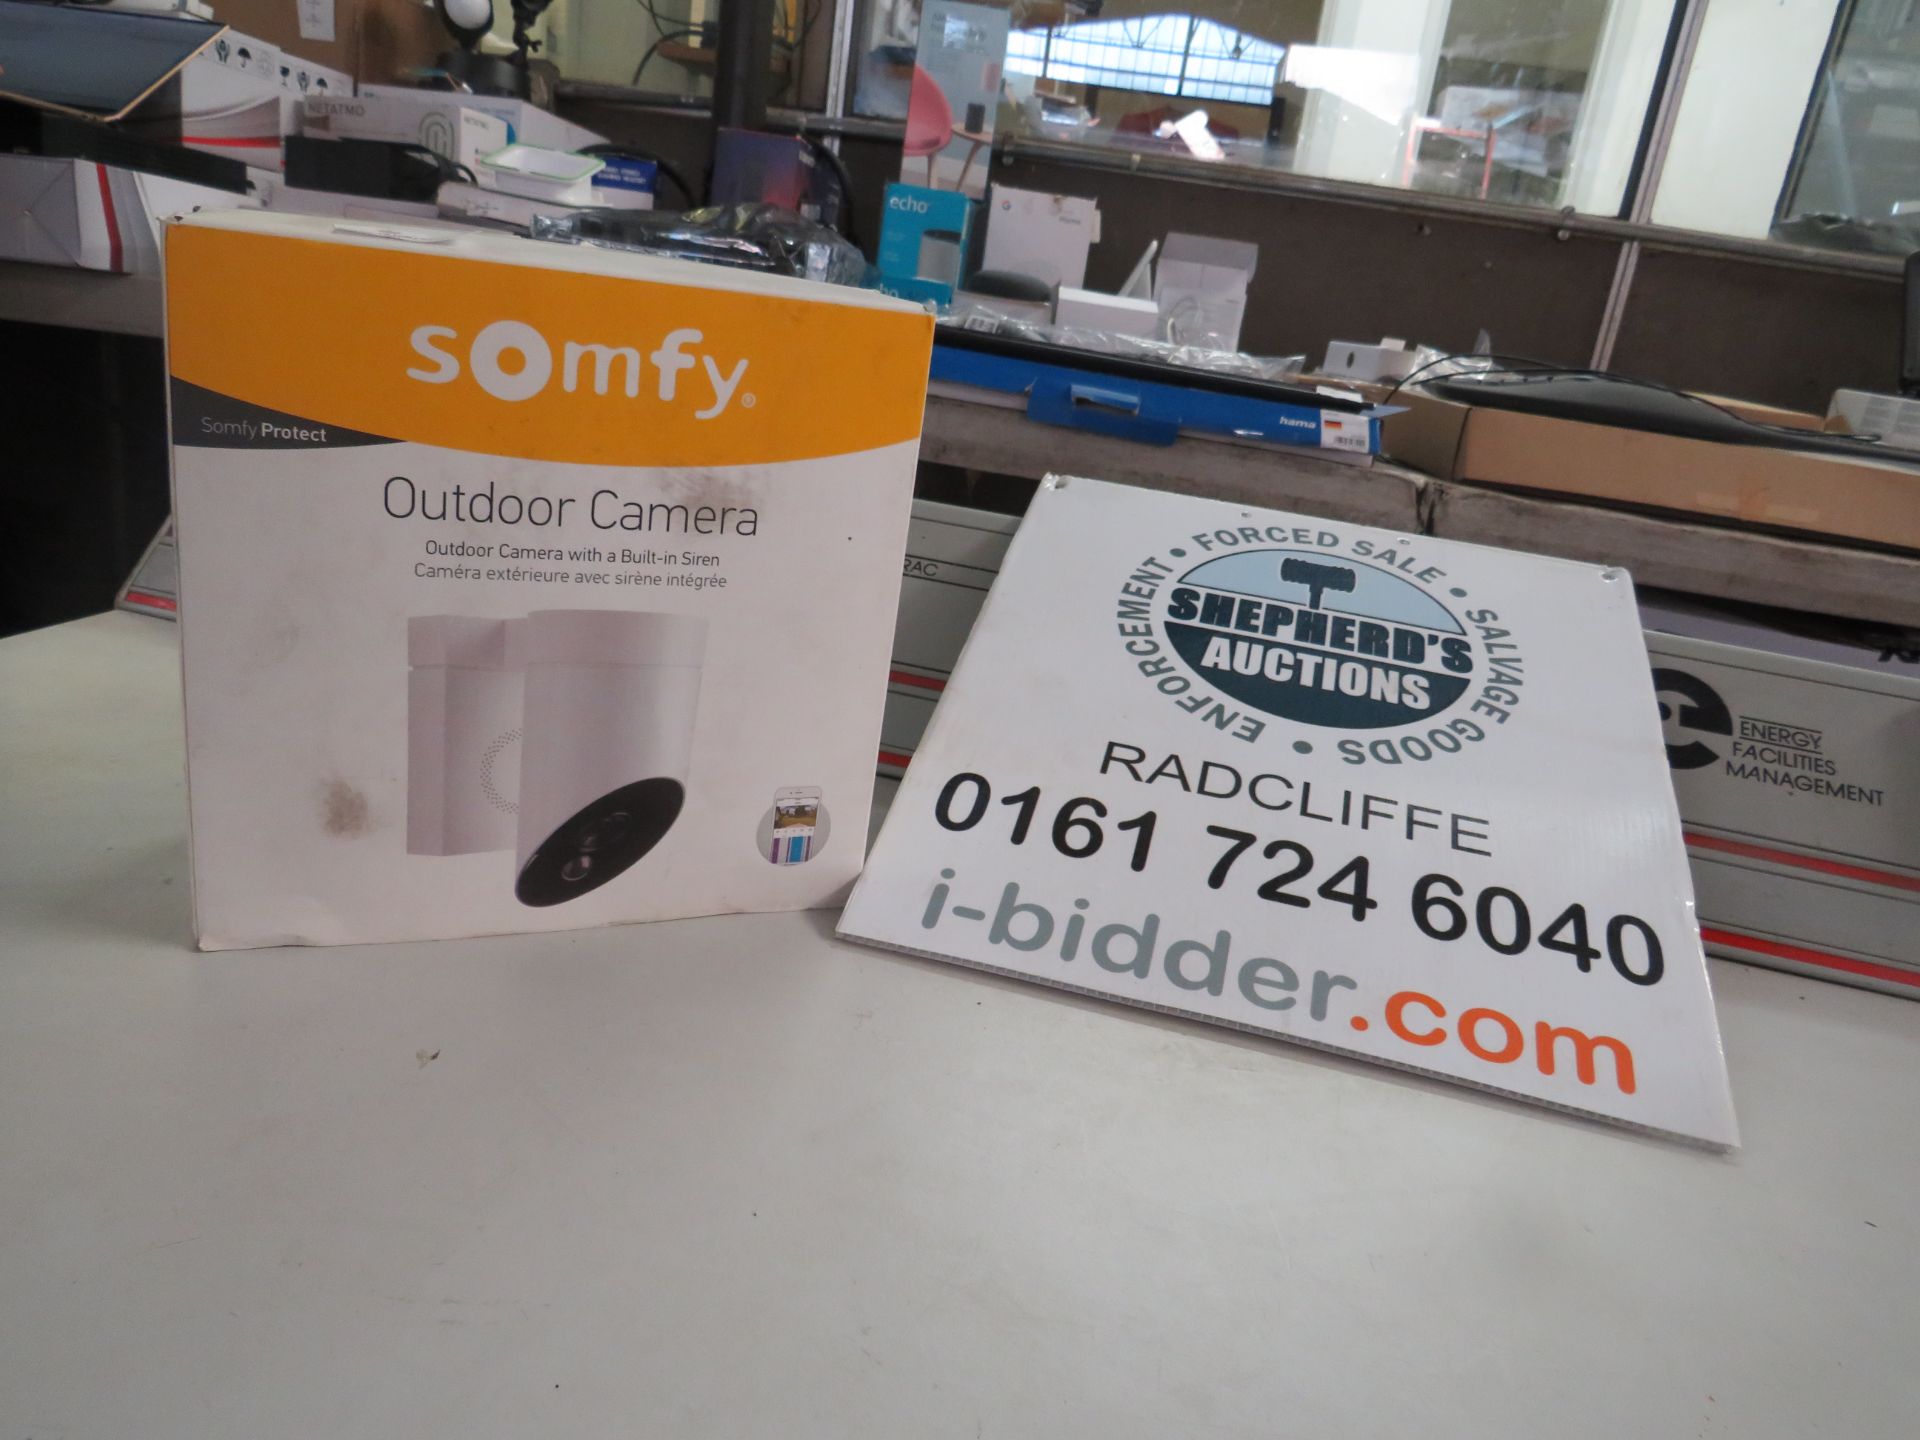 Somfy Outdoor camera with siren built in, unchecked as it would need wiring in, comes in original